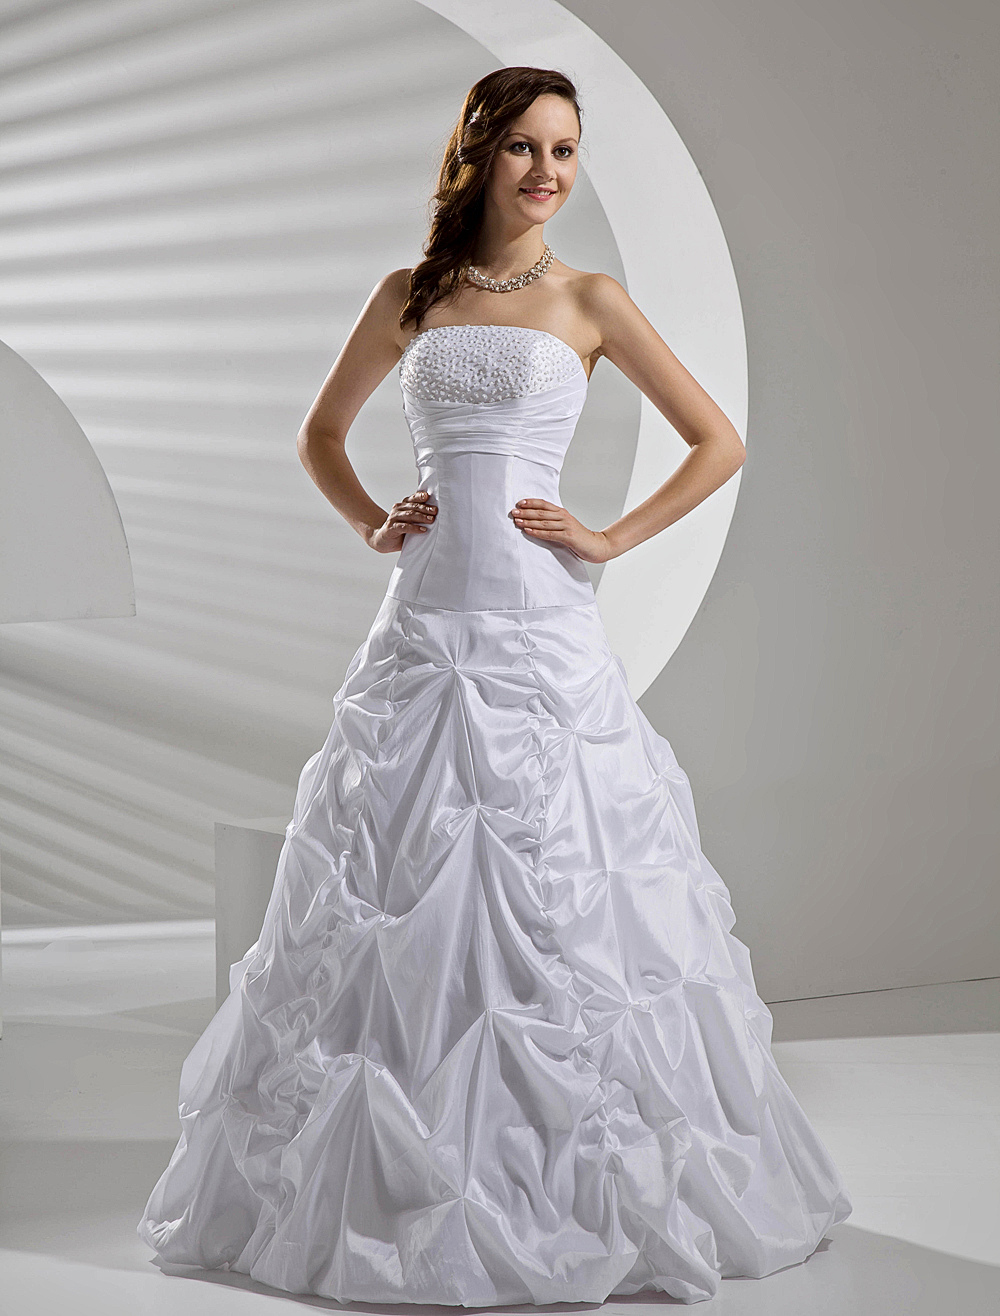 Amazing Strapless Taffeta Wedding Dress of all time Don t miss out 